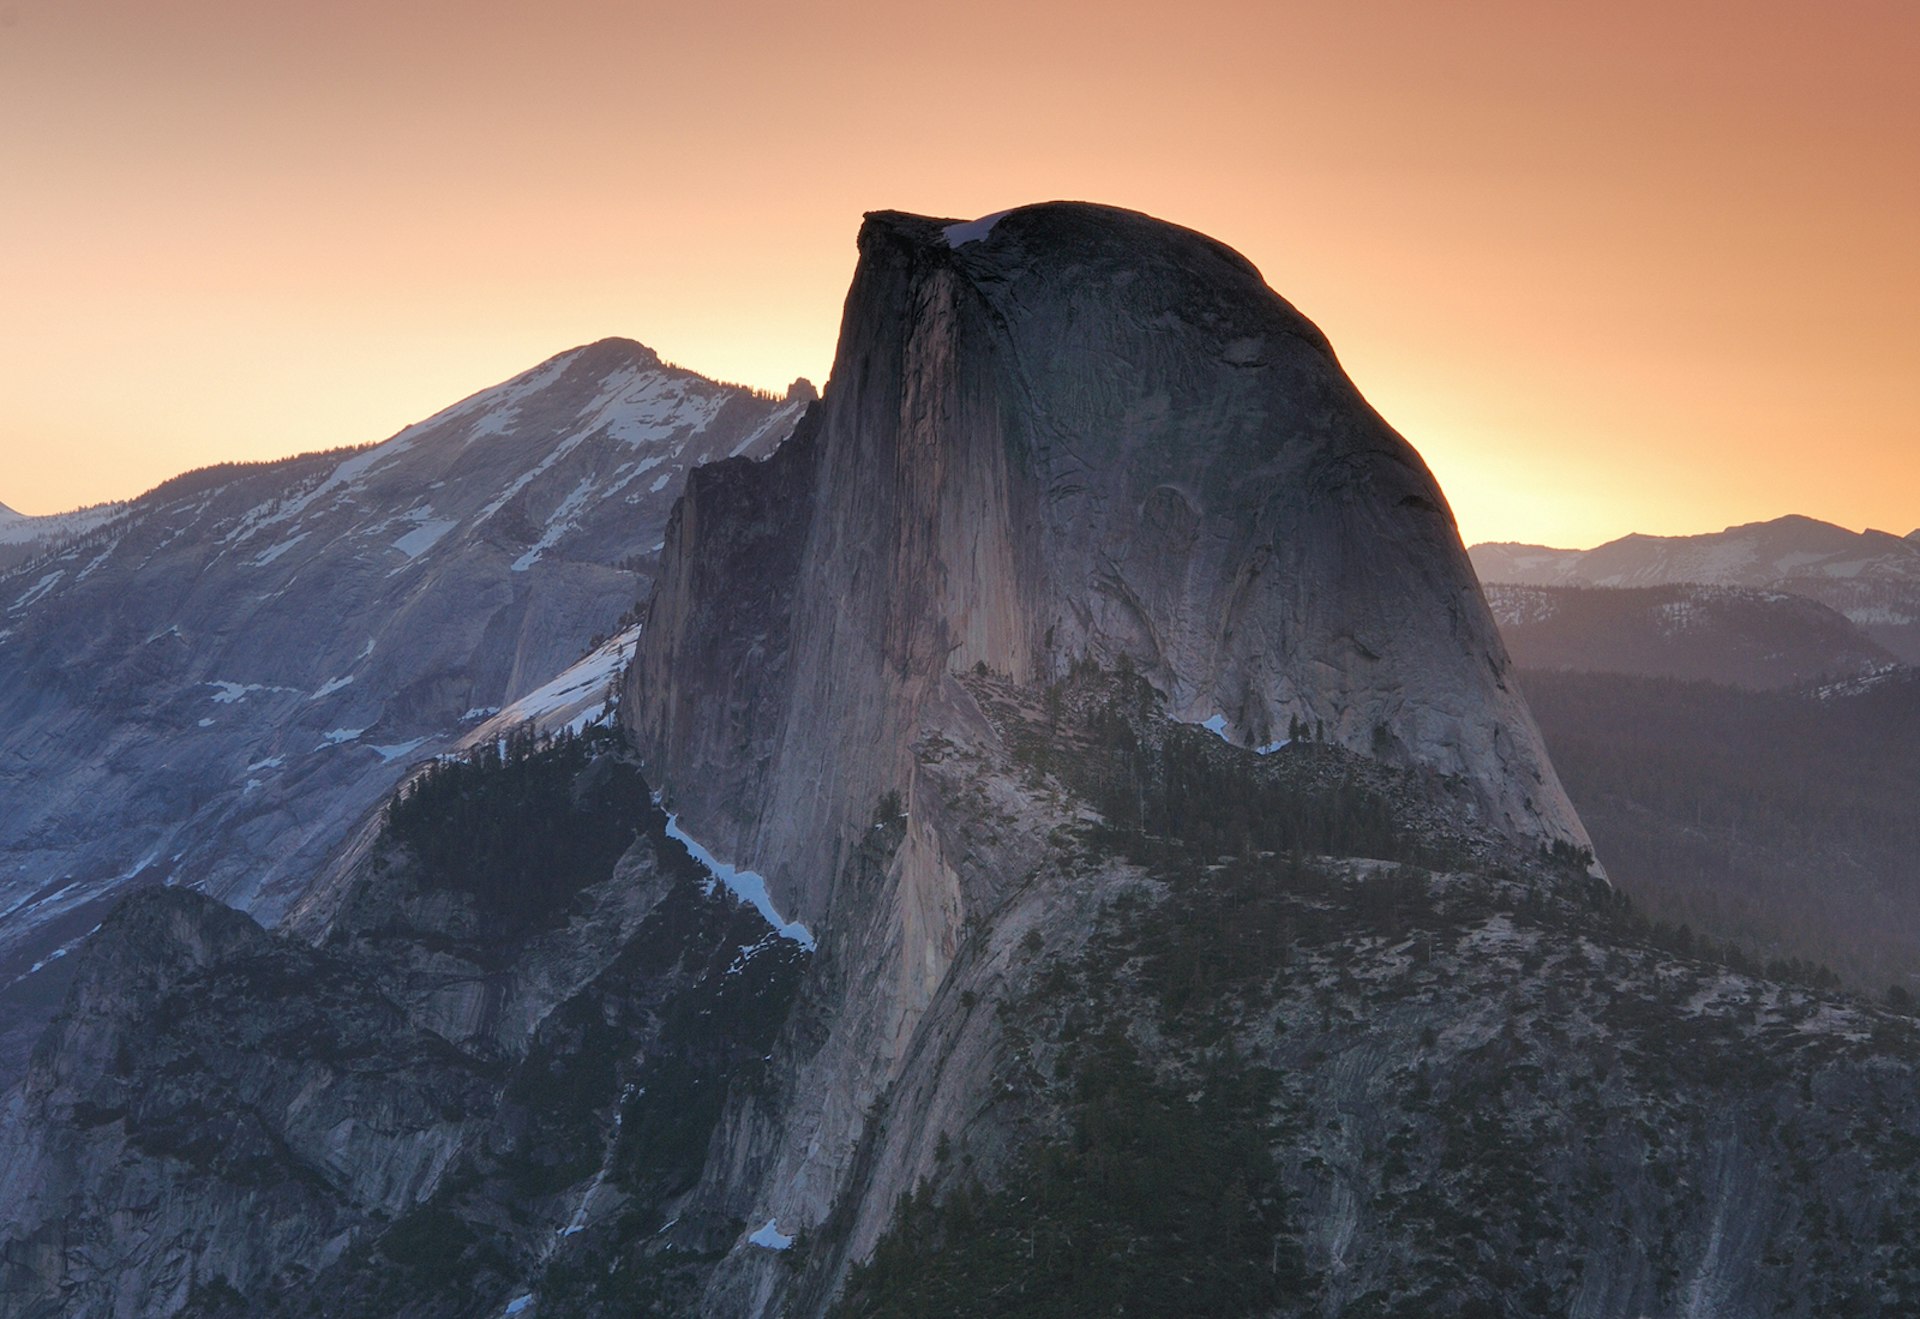 Features - "Half Dome with sunrise"